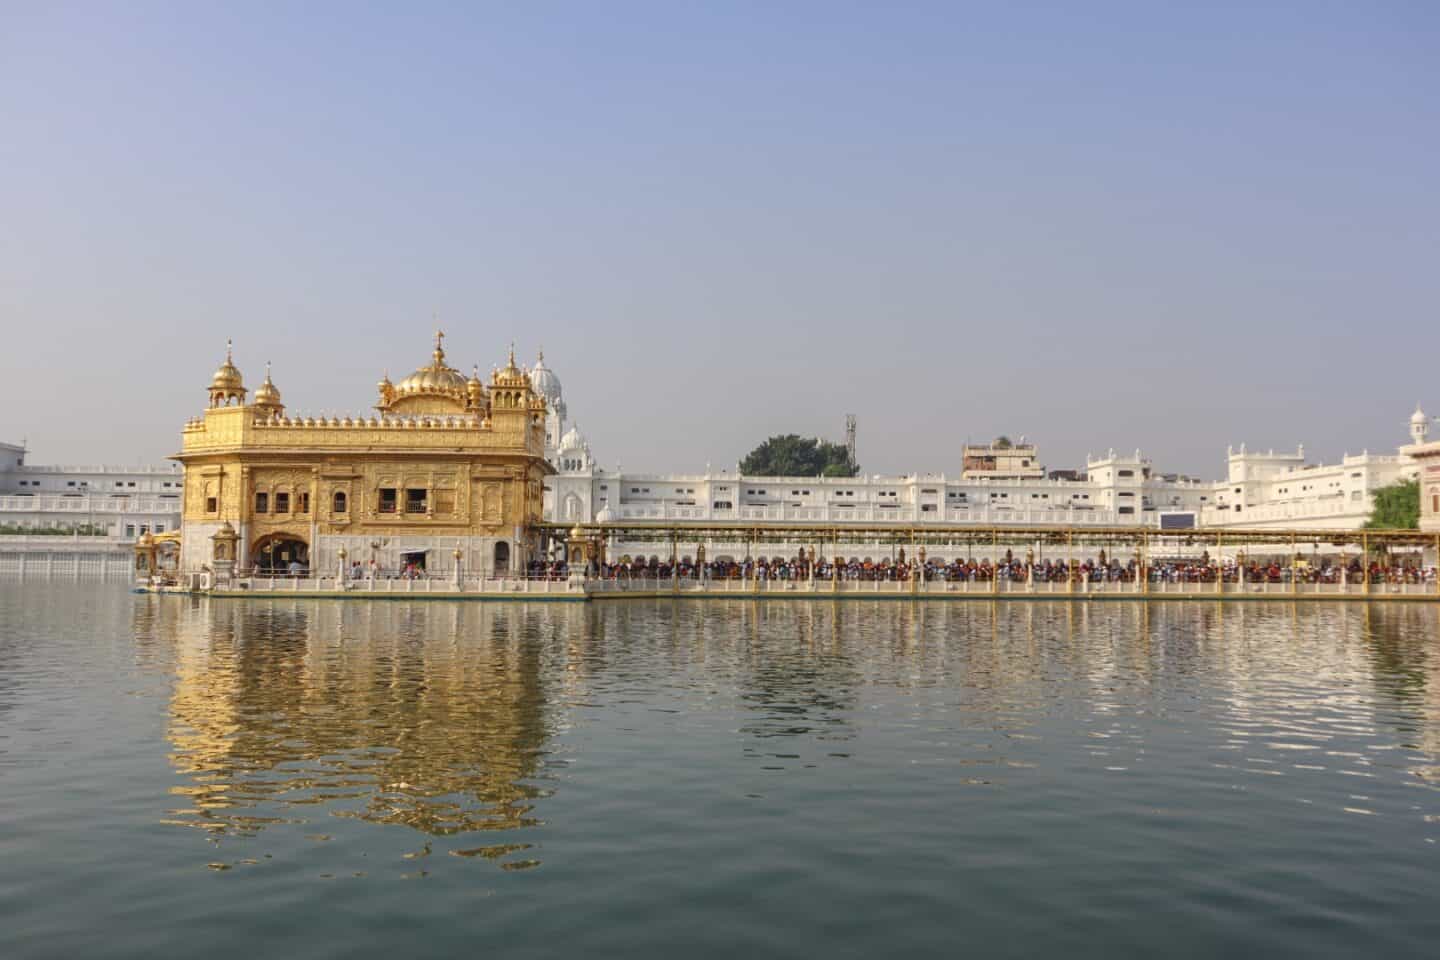 queues to get into the Golden Temple Amritsar